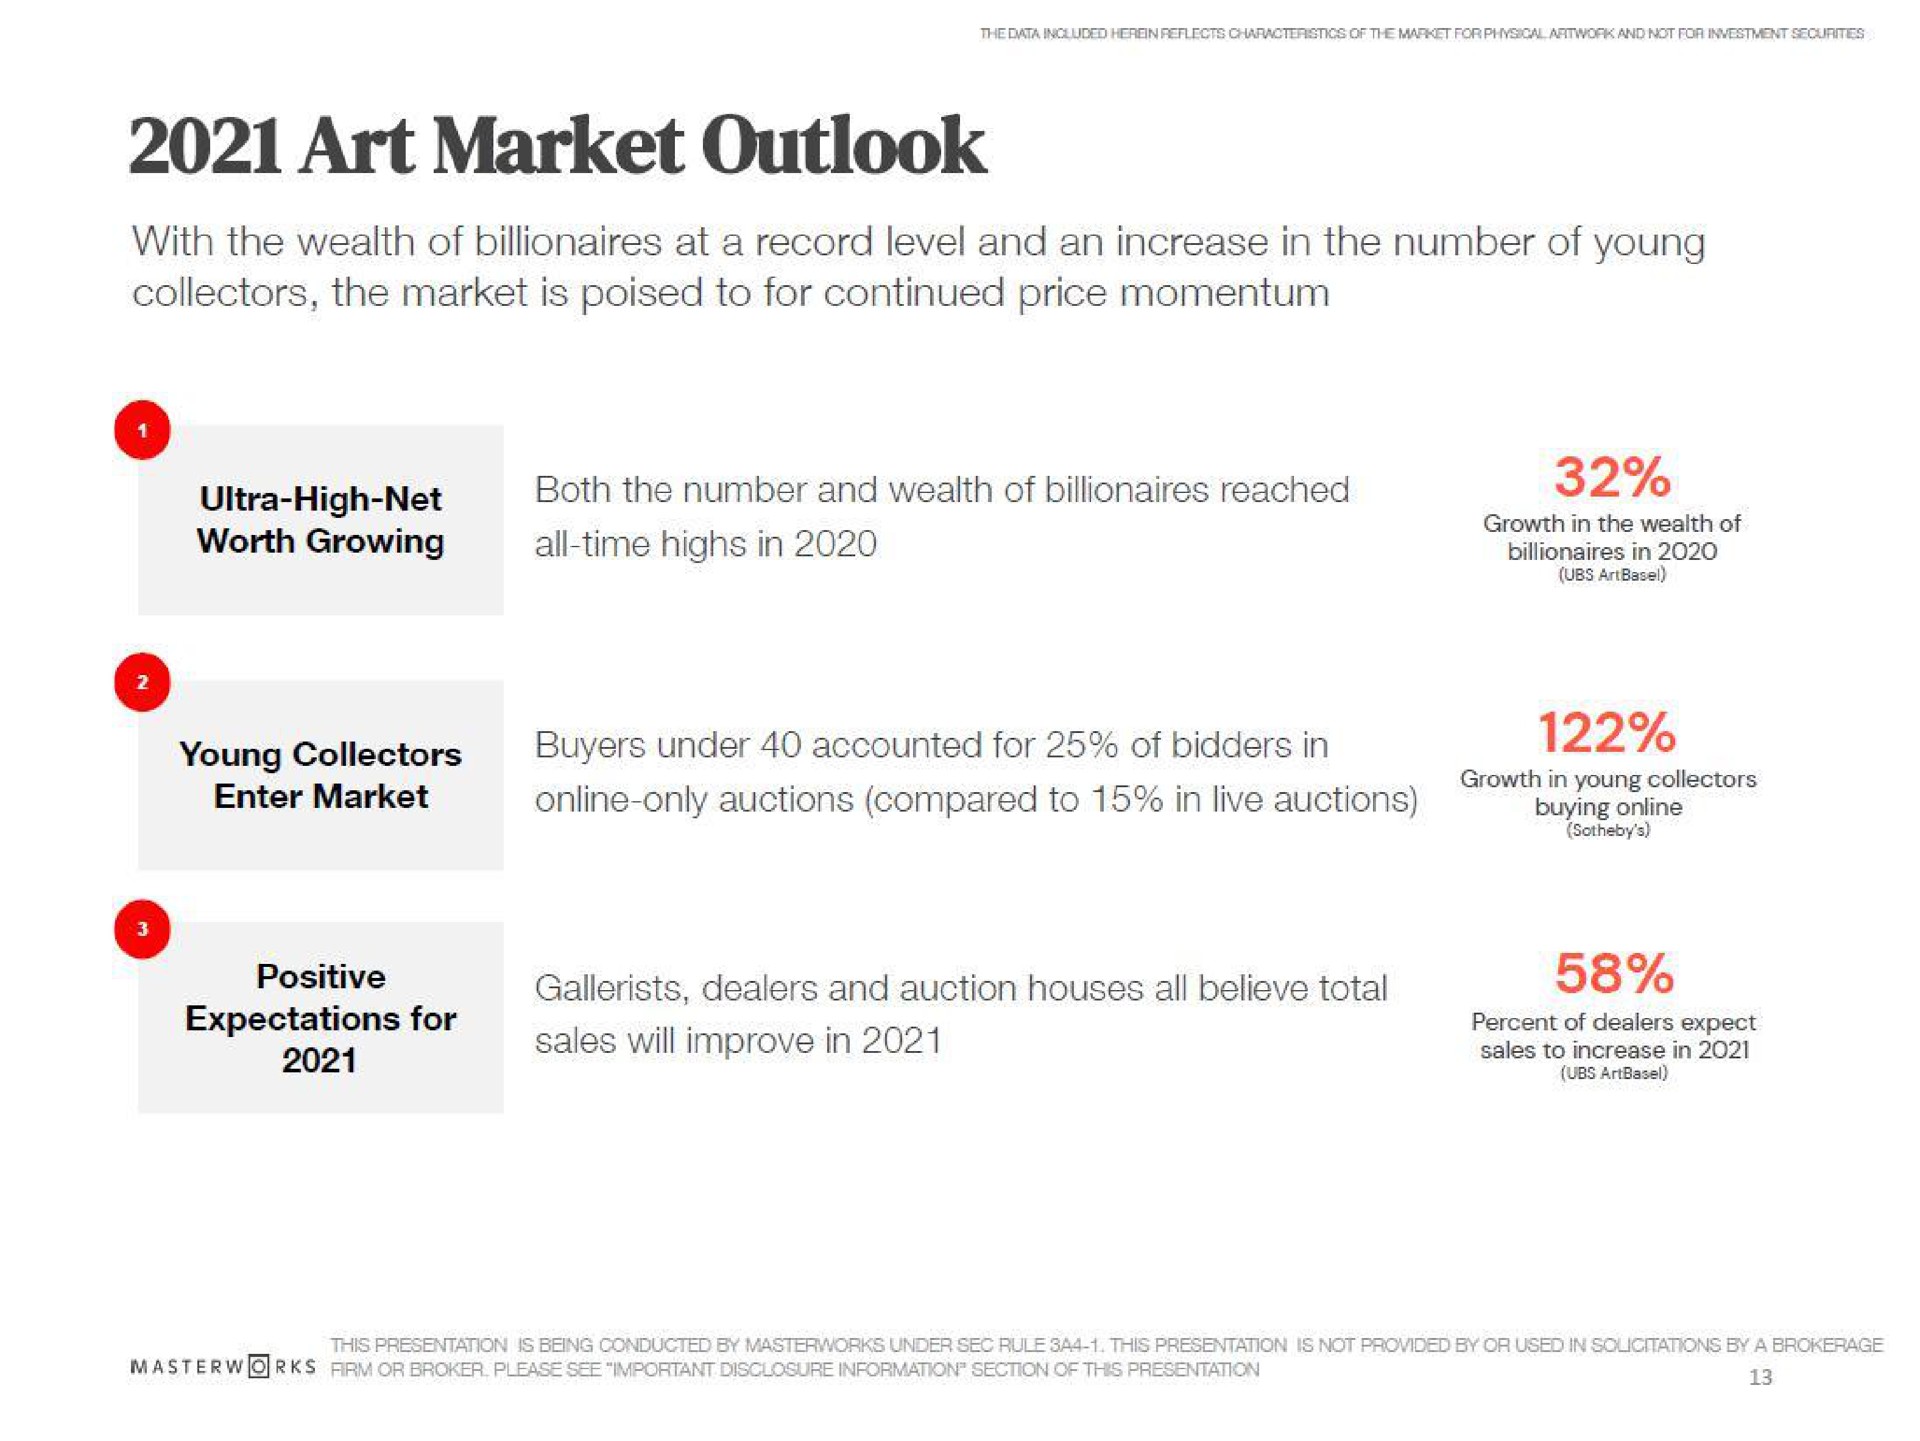 art market outlook with the wealth of billionaires at a record level and an increase in the number of young collectors the market is poised to for continued price momentum ultra high net worth growing both the number and wealth of billionaires reached all time highs in young collectors enter market positive buyers under accounted for of bidders in only auctions compared to in live auctions dealers and auction houses all believe total sales will improve in buying to in | Masterworks